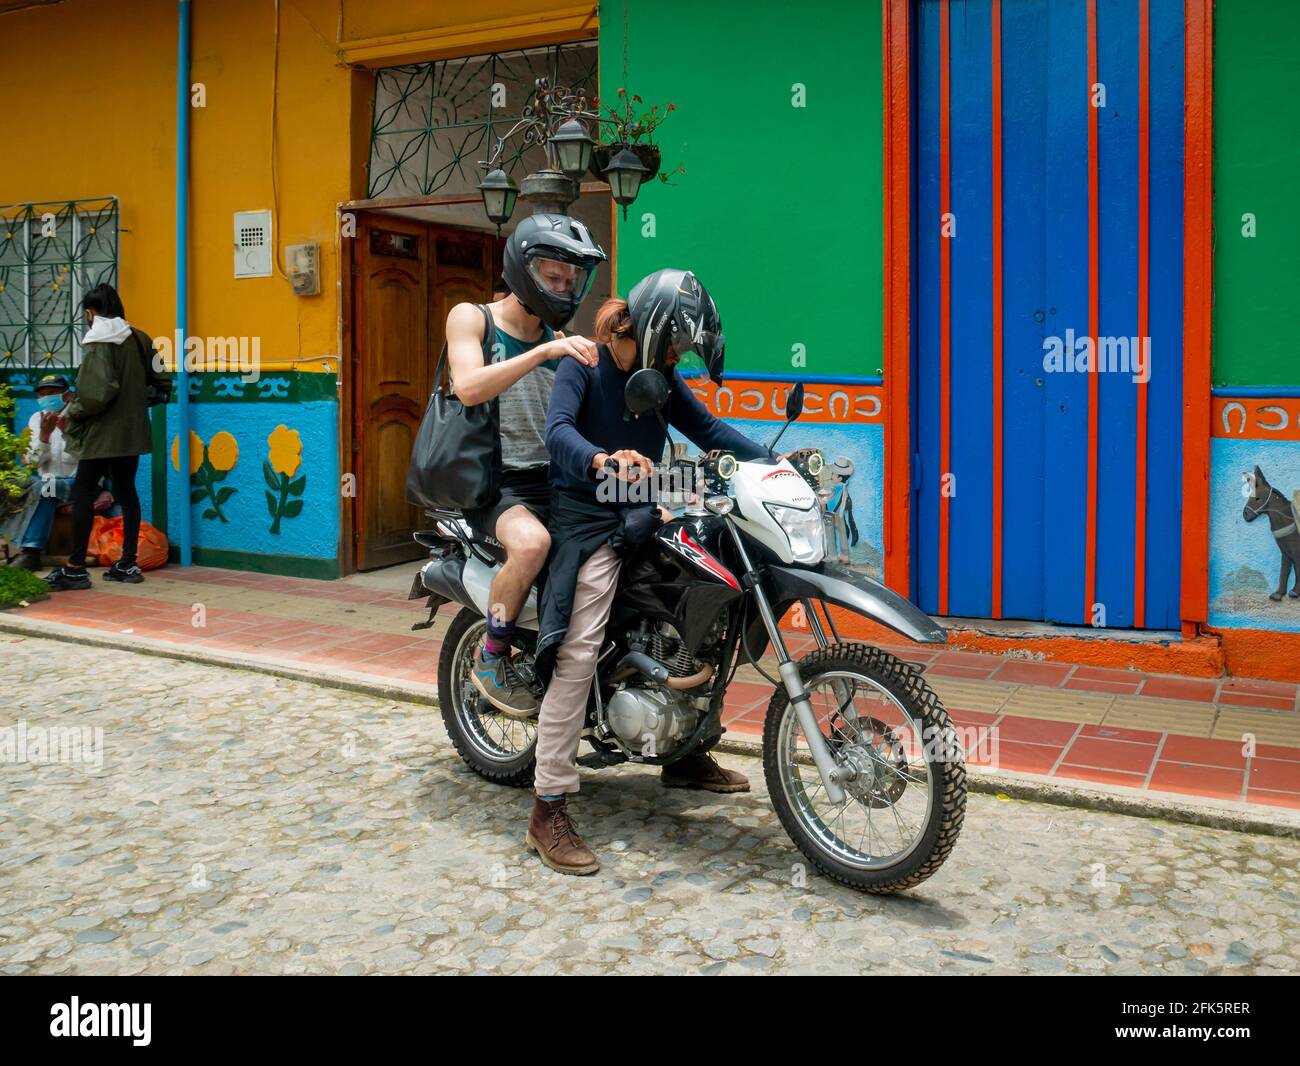 Guatapé, Antioquia, Colombia - April 4 2021: Woman Riding a Motorcycle and a Young White Man Getting on Behind Her Stock Photo